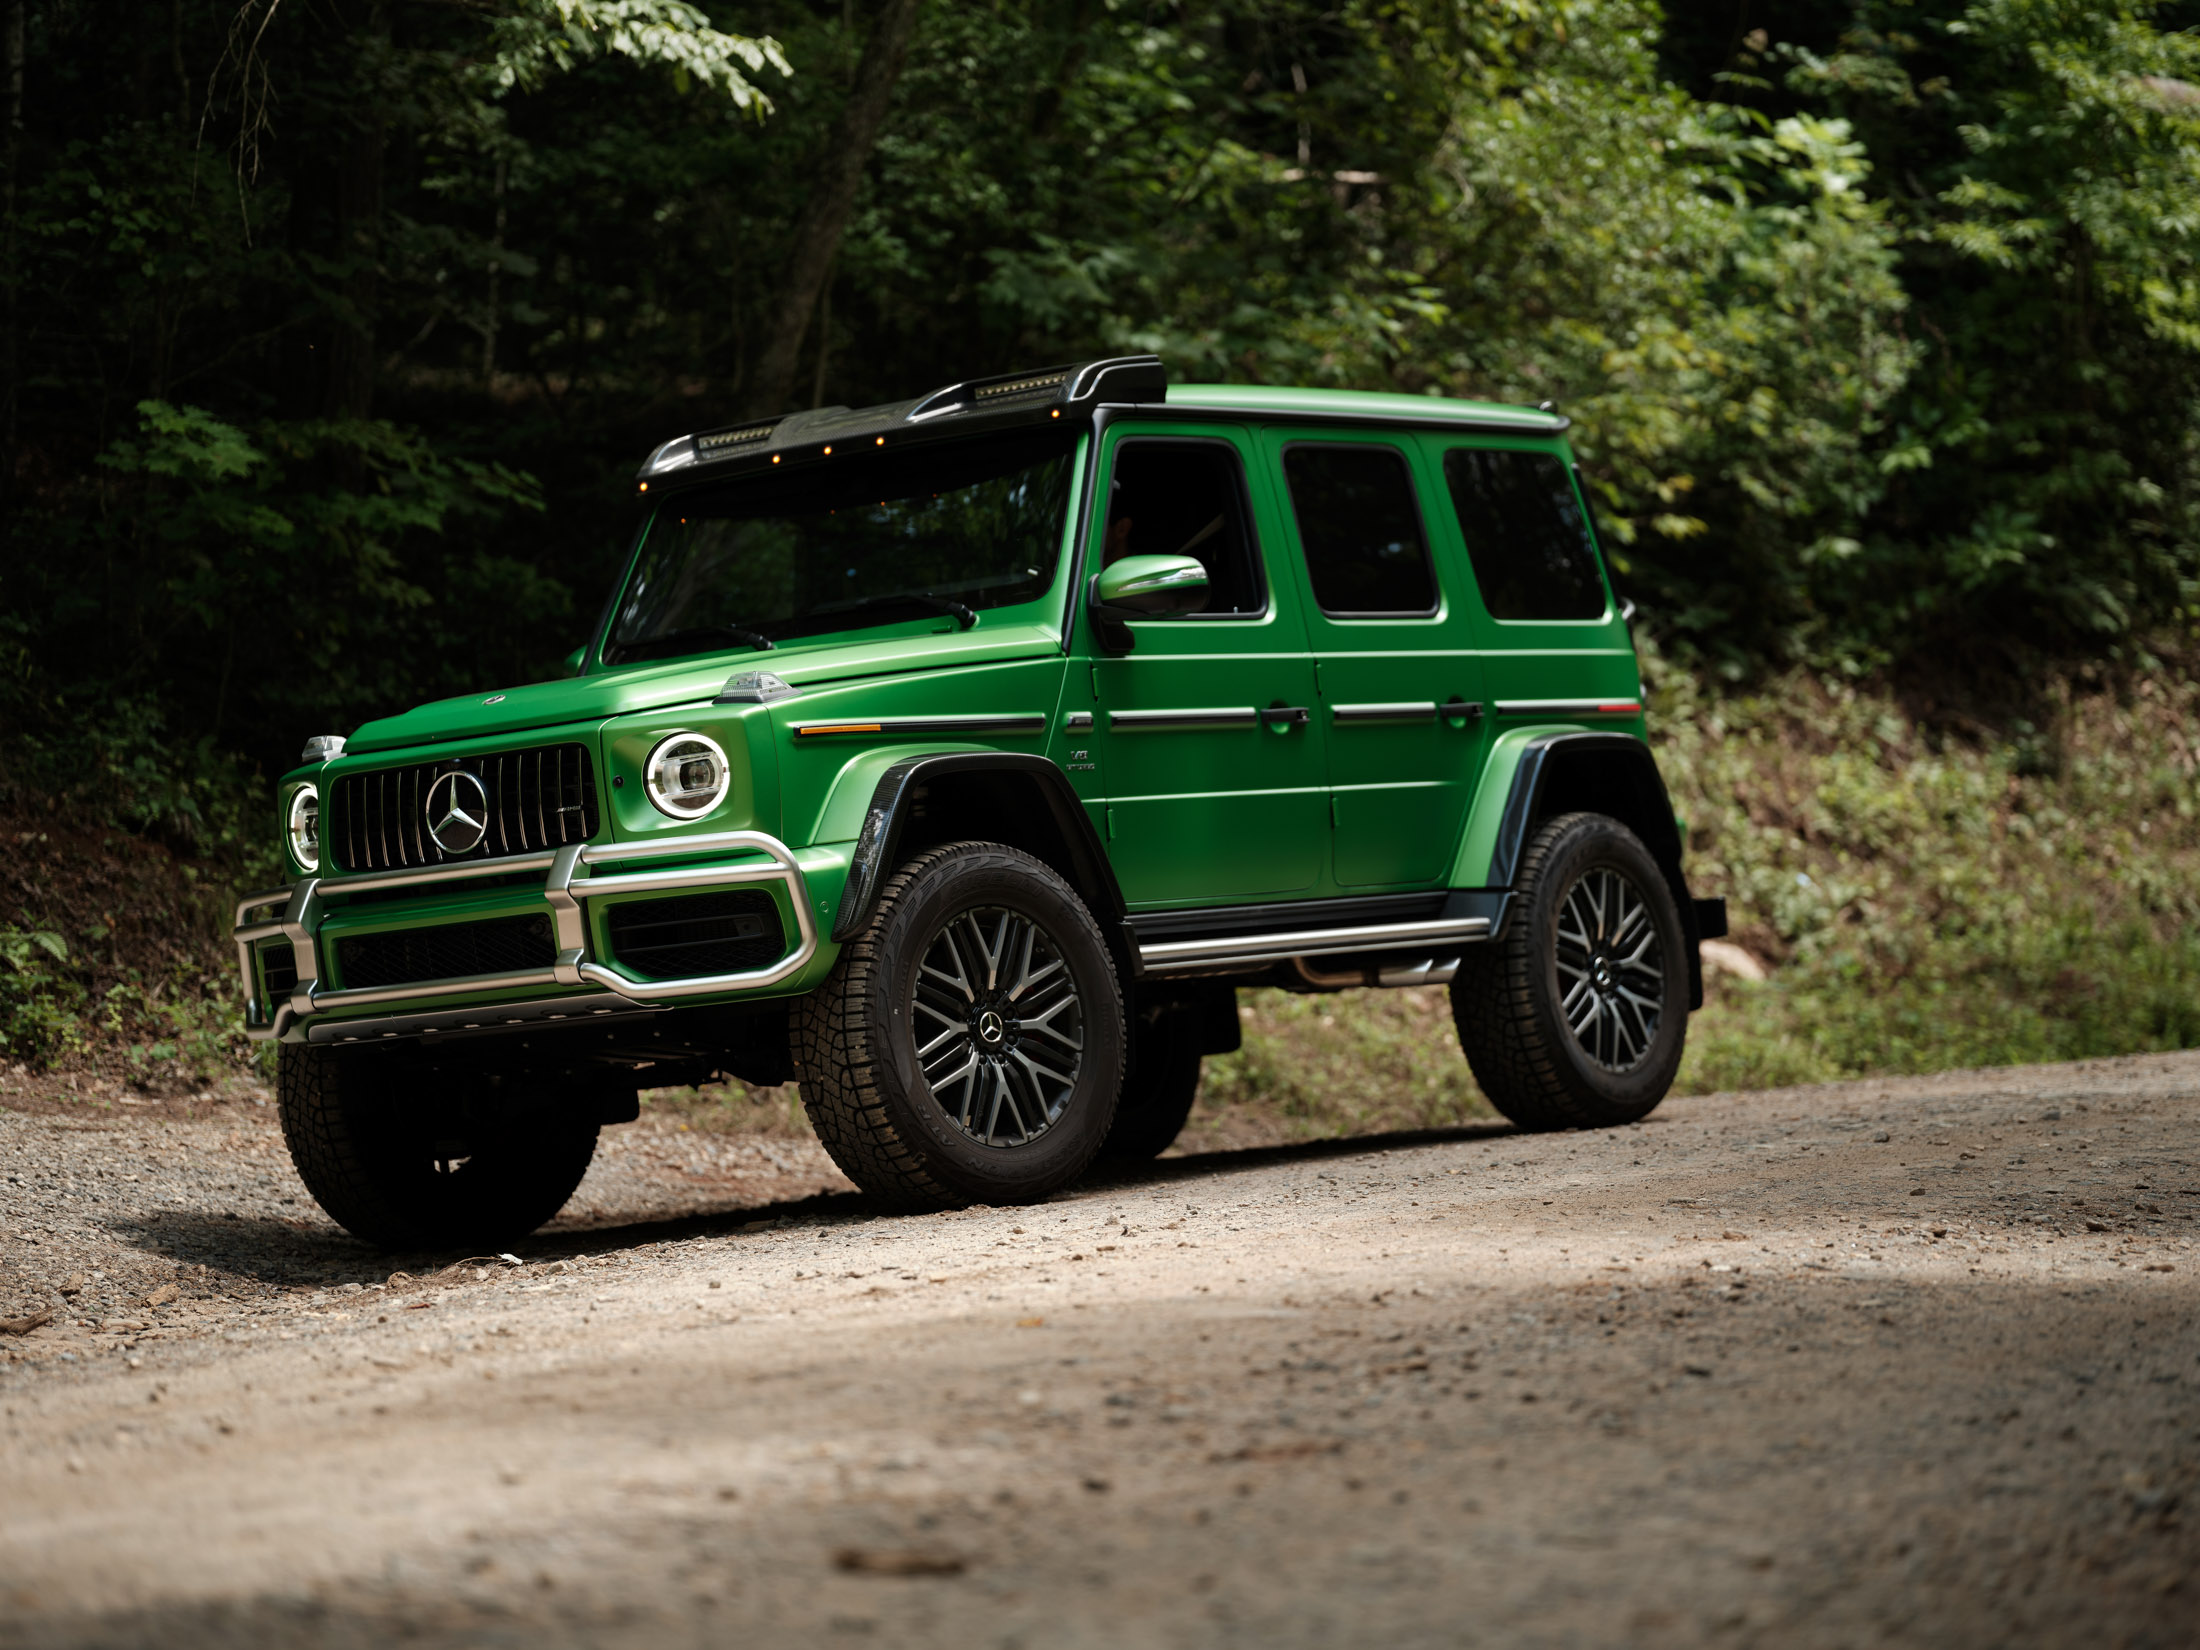 2019 Mercedes-Benz G-Class: The Most Luxurious Box in the World